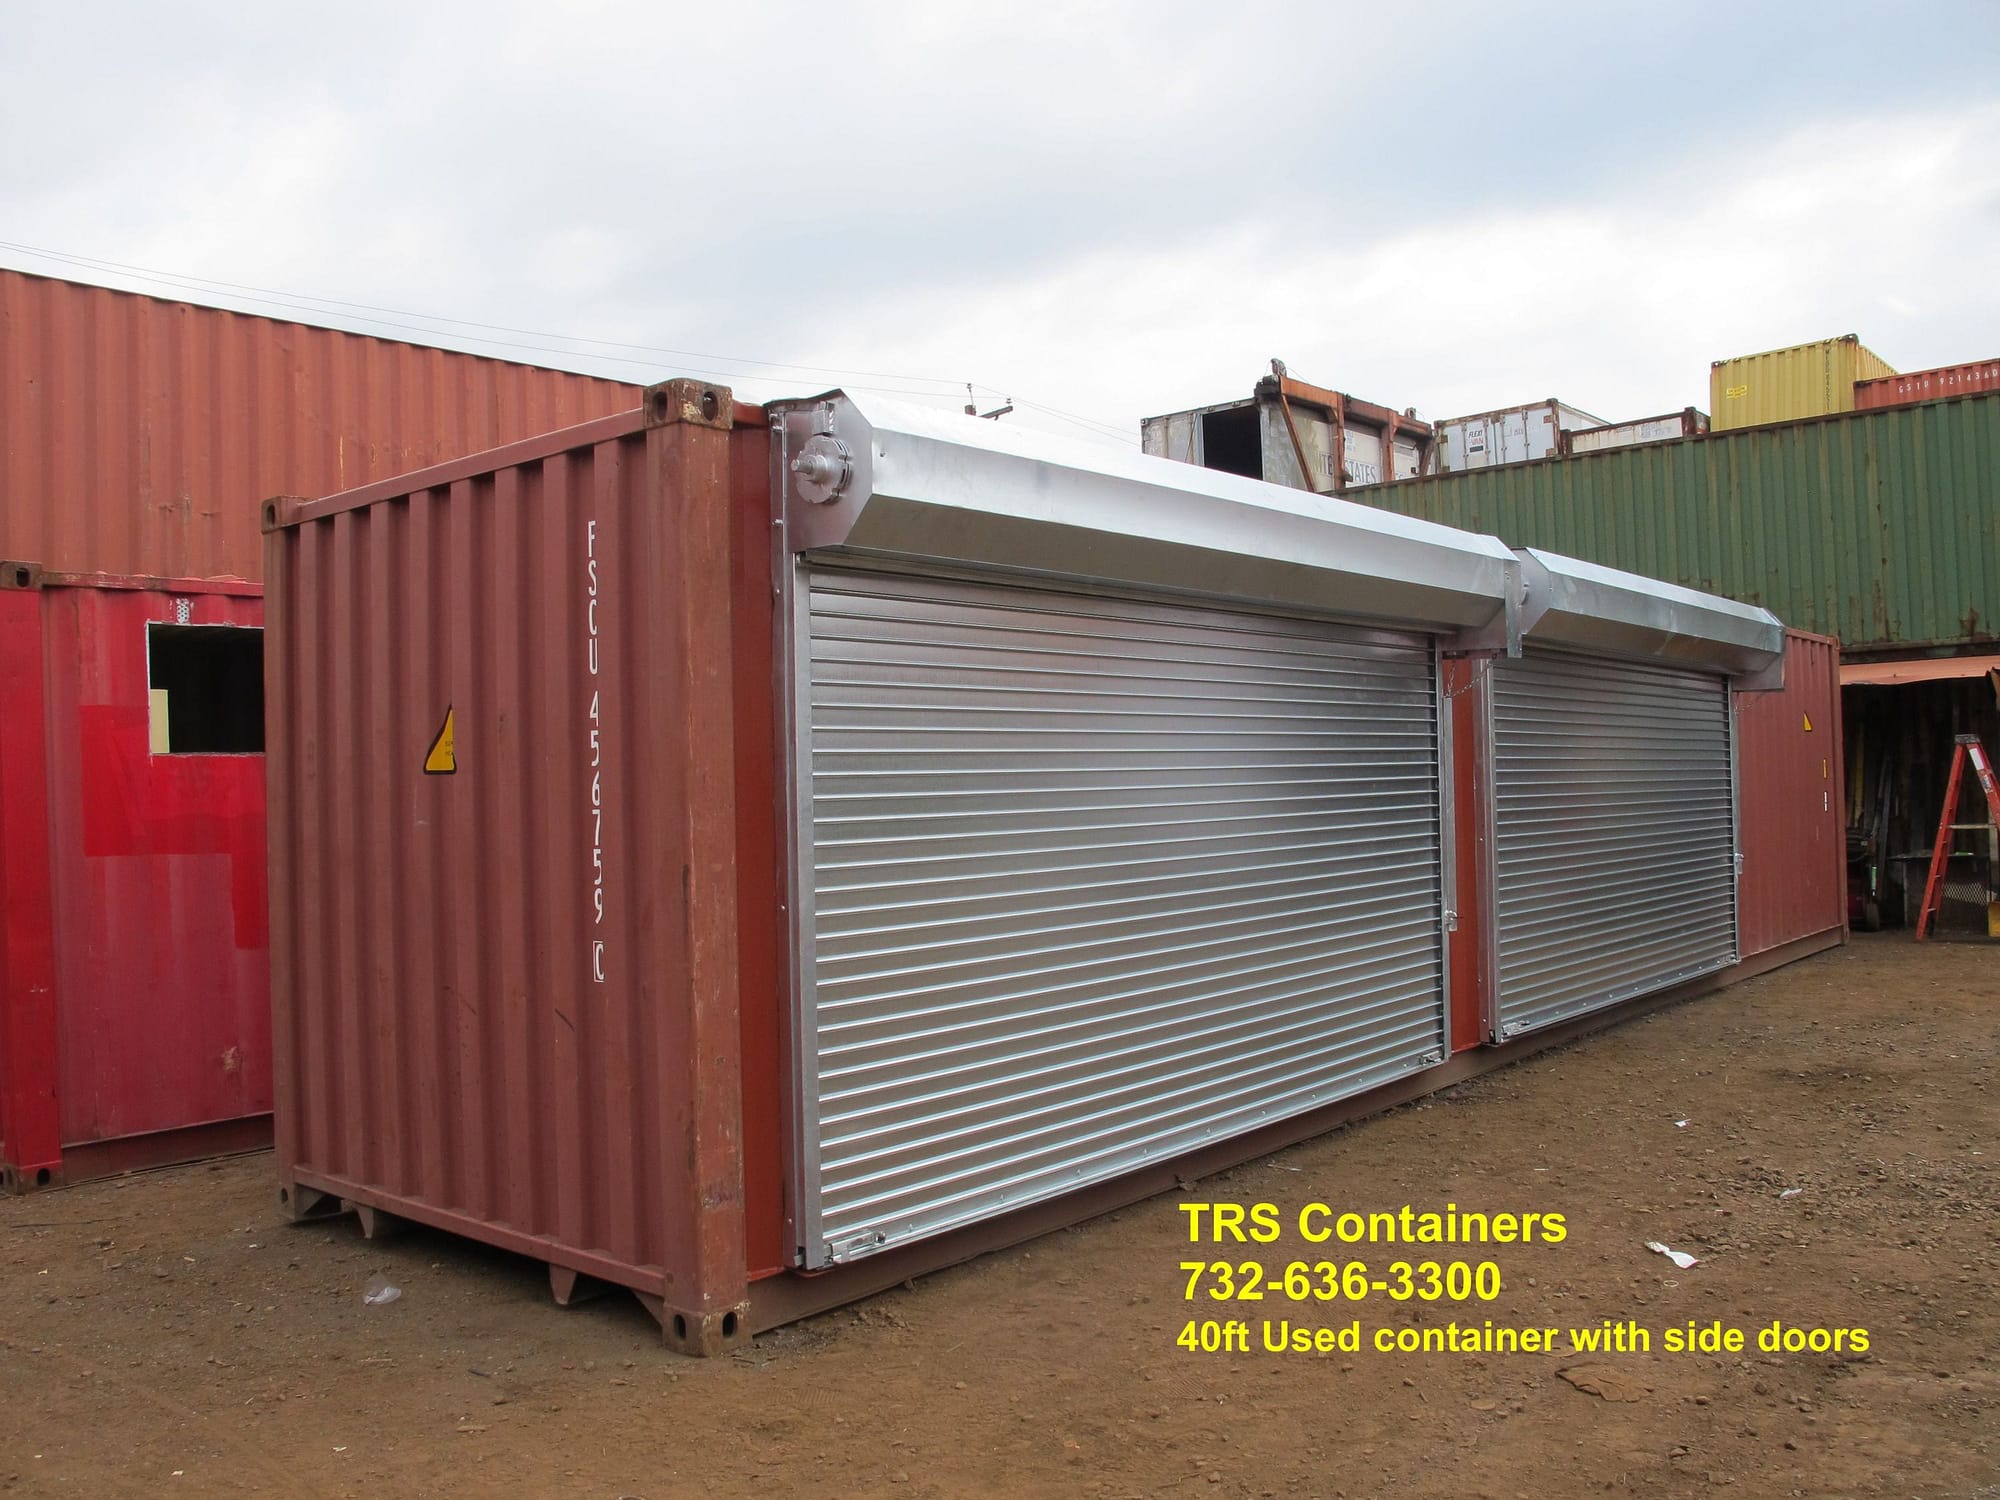 TRS Containers NJ offers additional container access wtih exterior or interior mount roll up doors